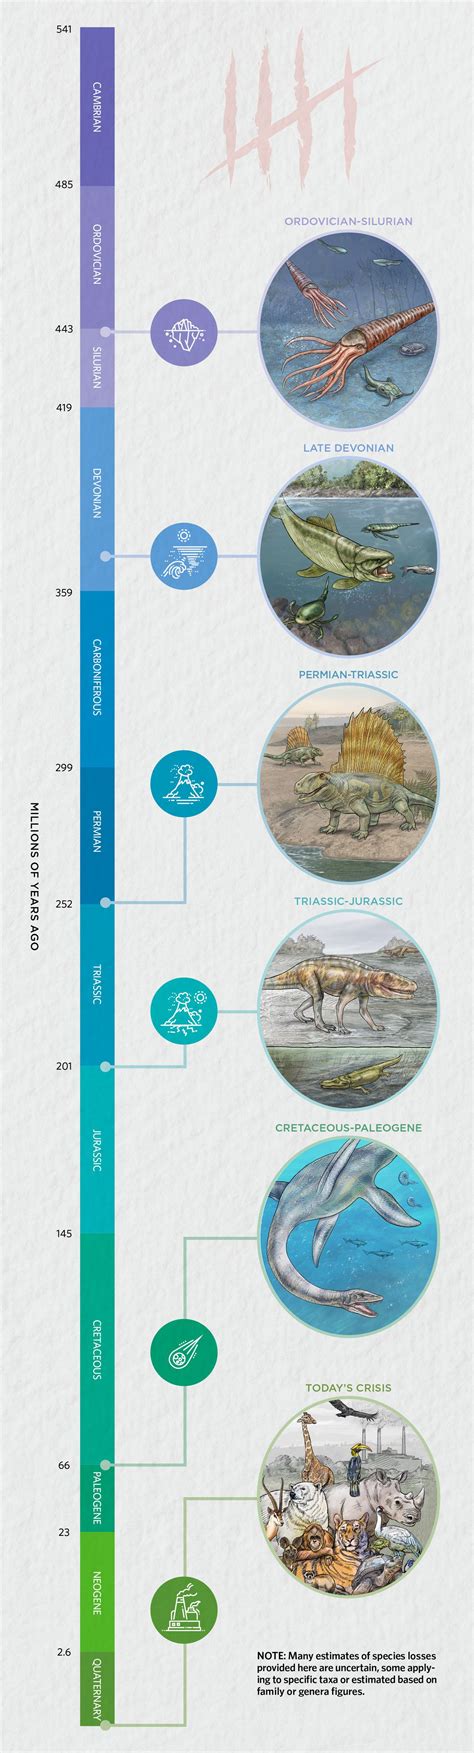 Infographic A Look At The Big Five Mass Extinctions Ts Digest The Scientist